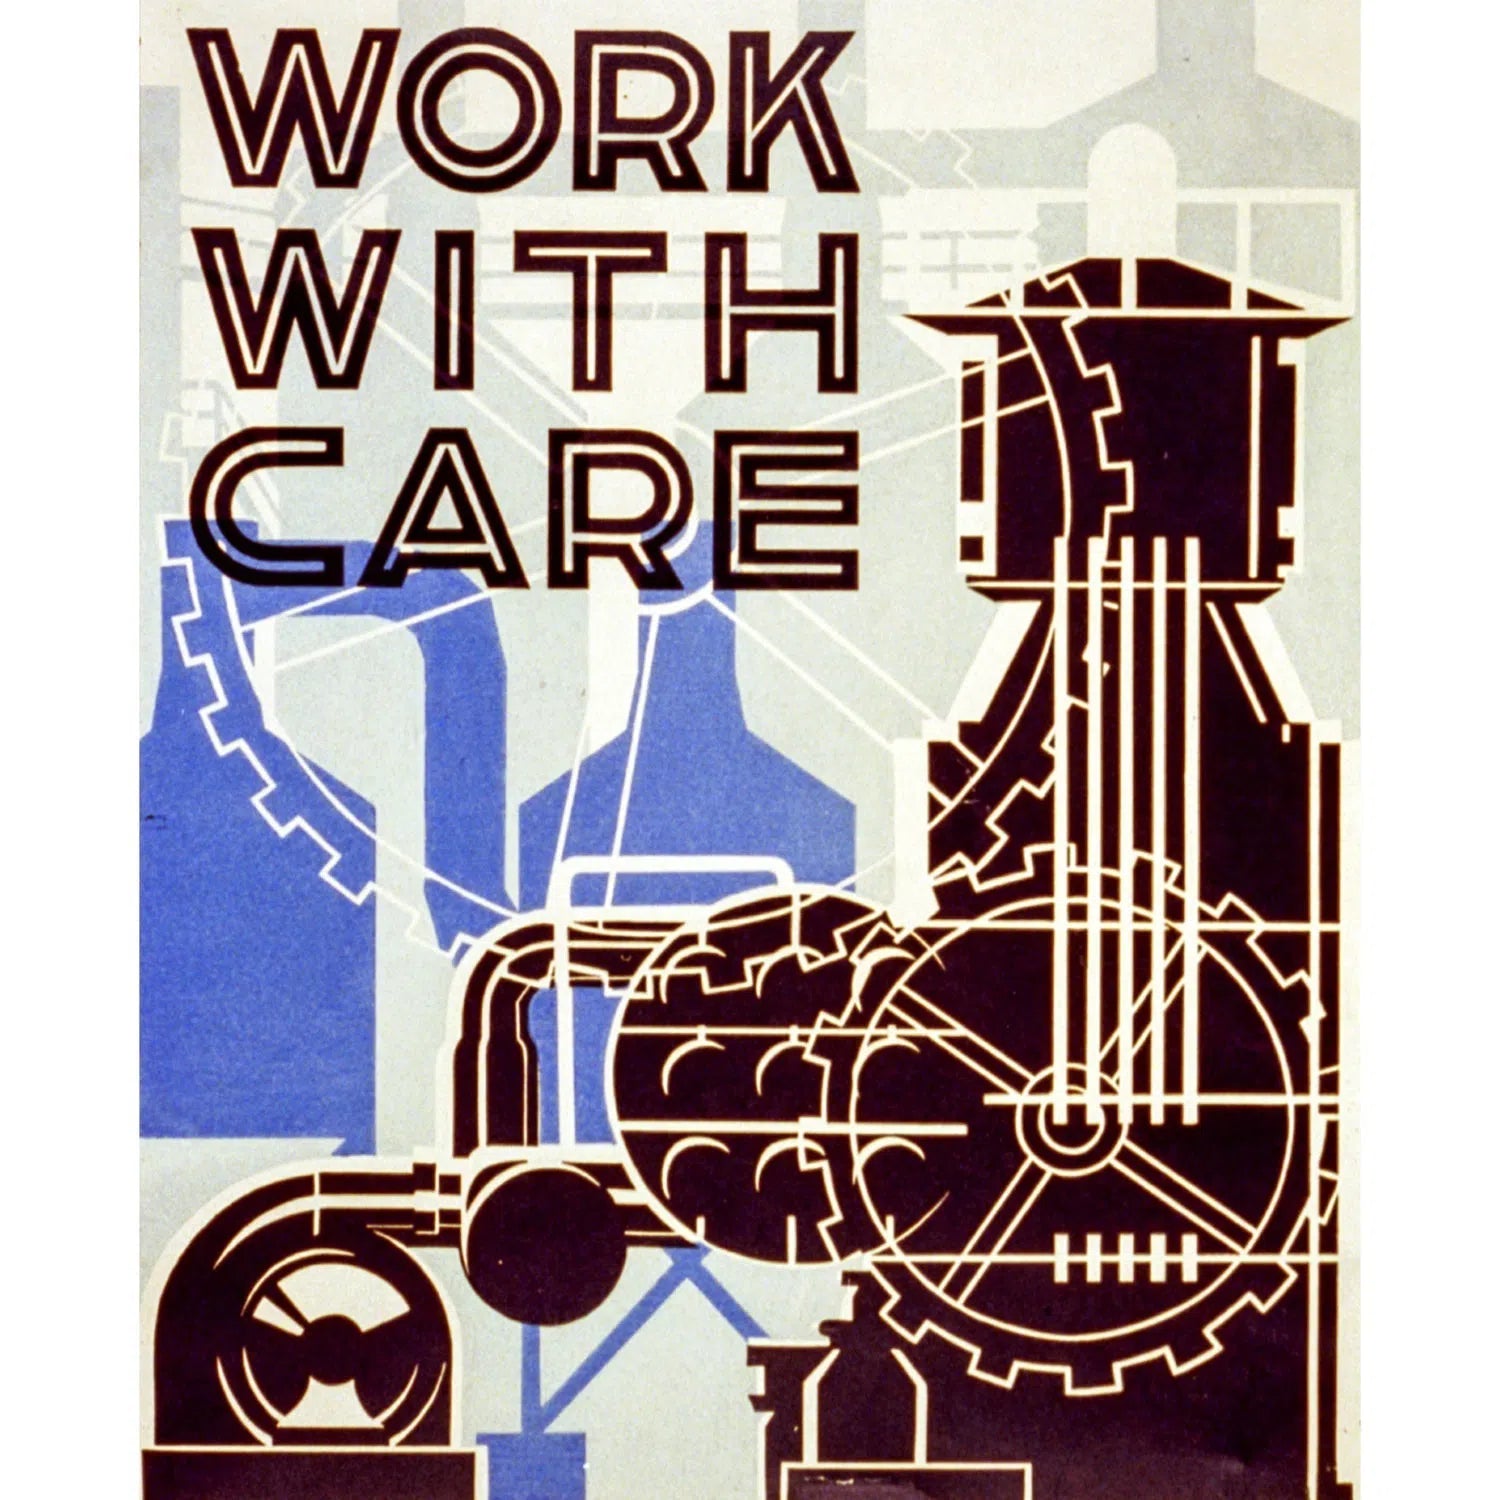 Work with care-Imagesdartistes